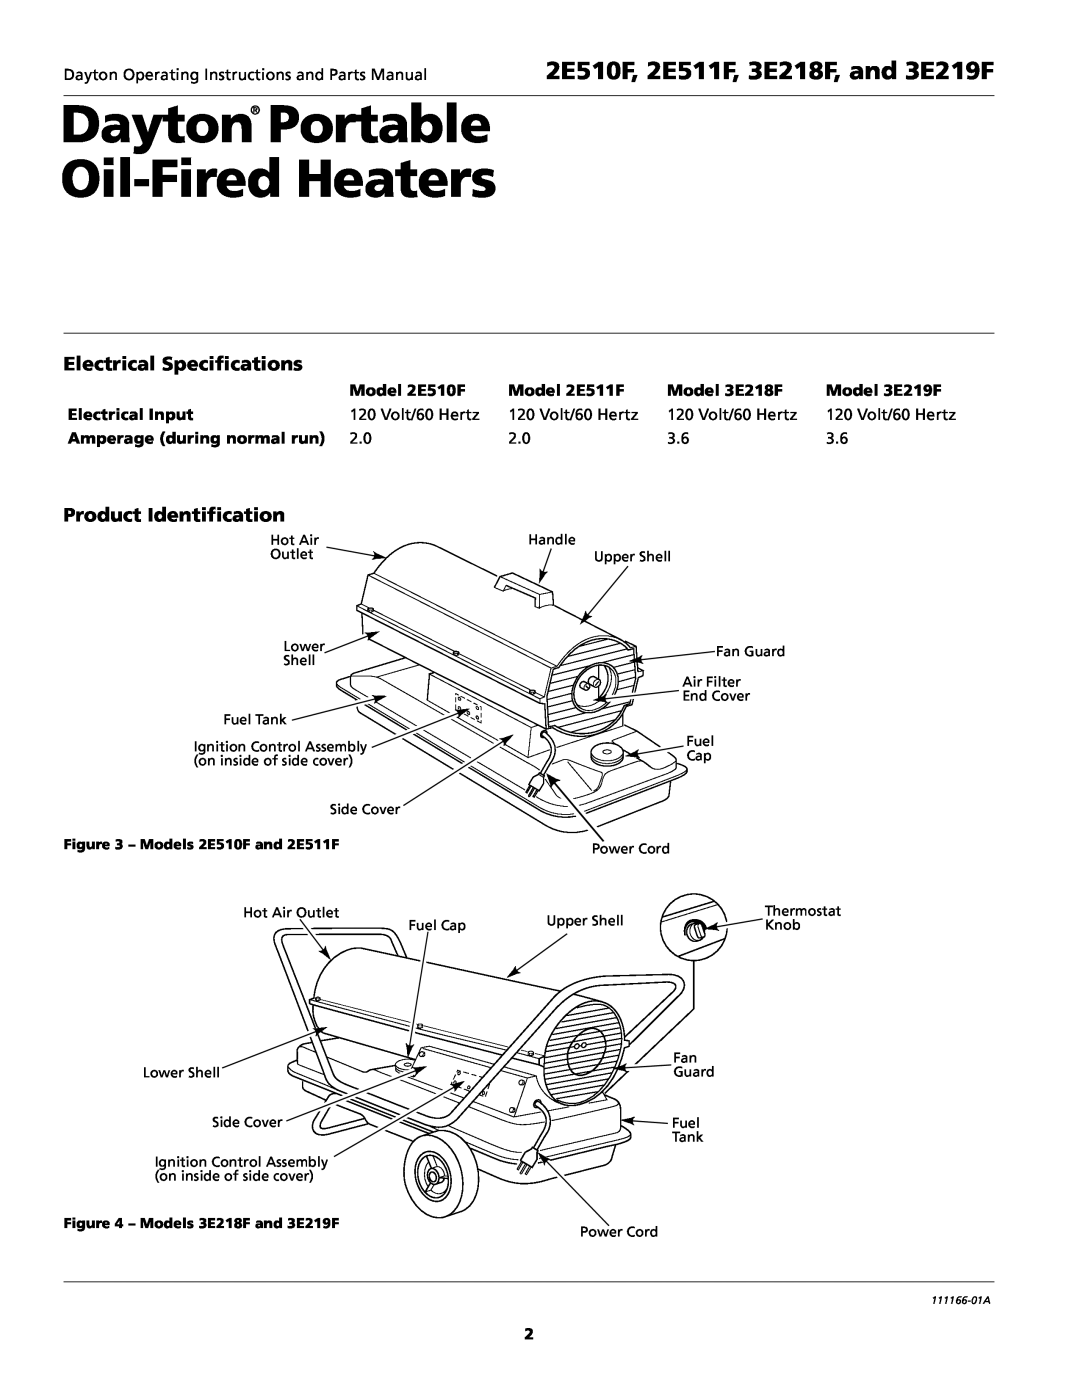 Dayton 5S1792 Dayton Portable Oil-Fired Heaters, 2E510F, 2E511F, 3E218F, and 3E219F, Electrical Specifications 